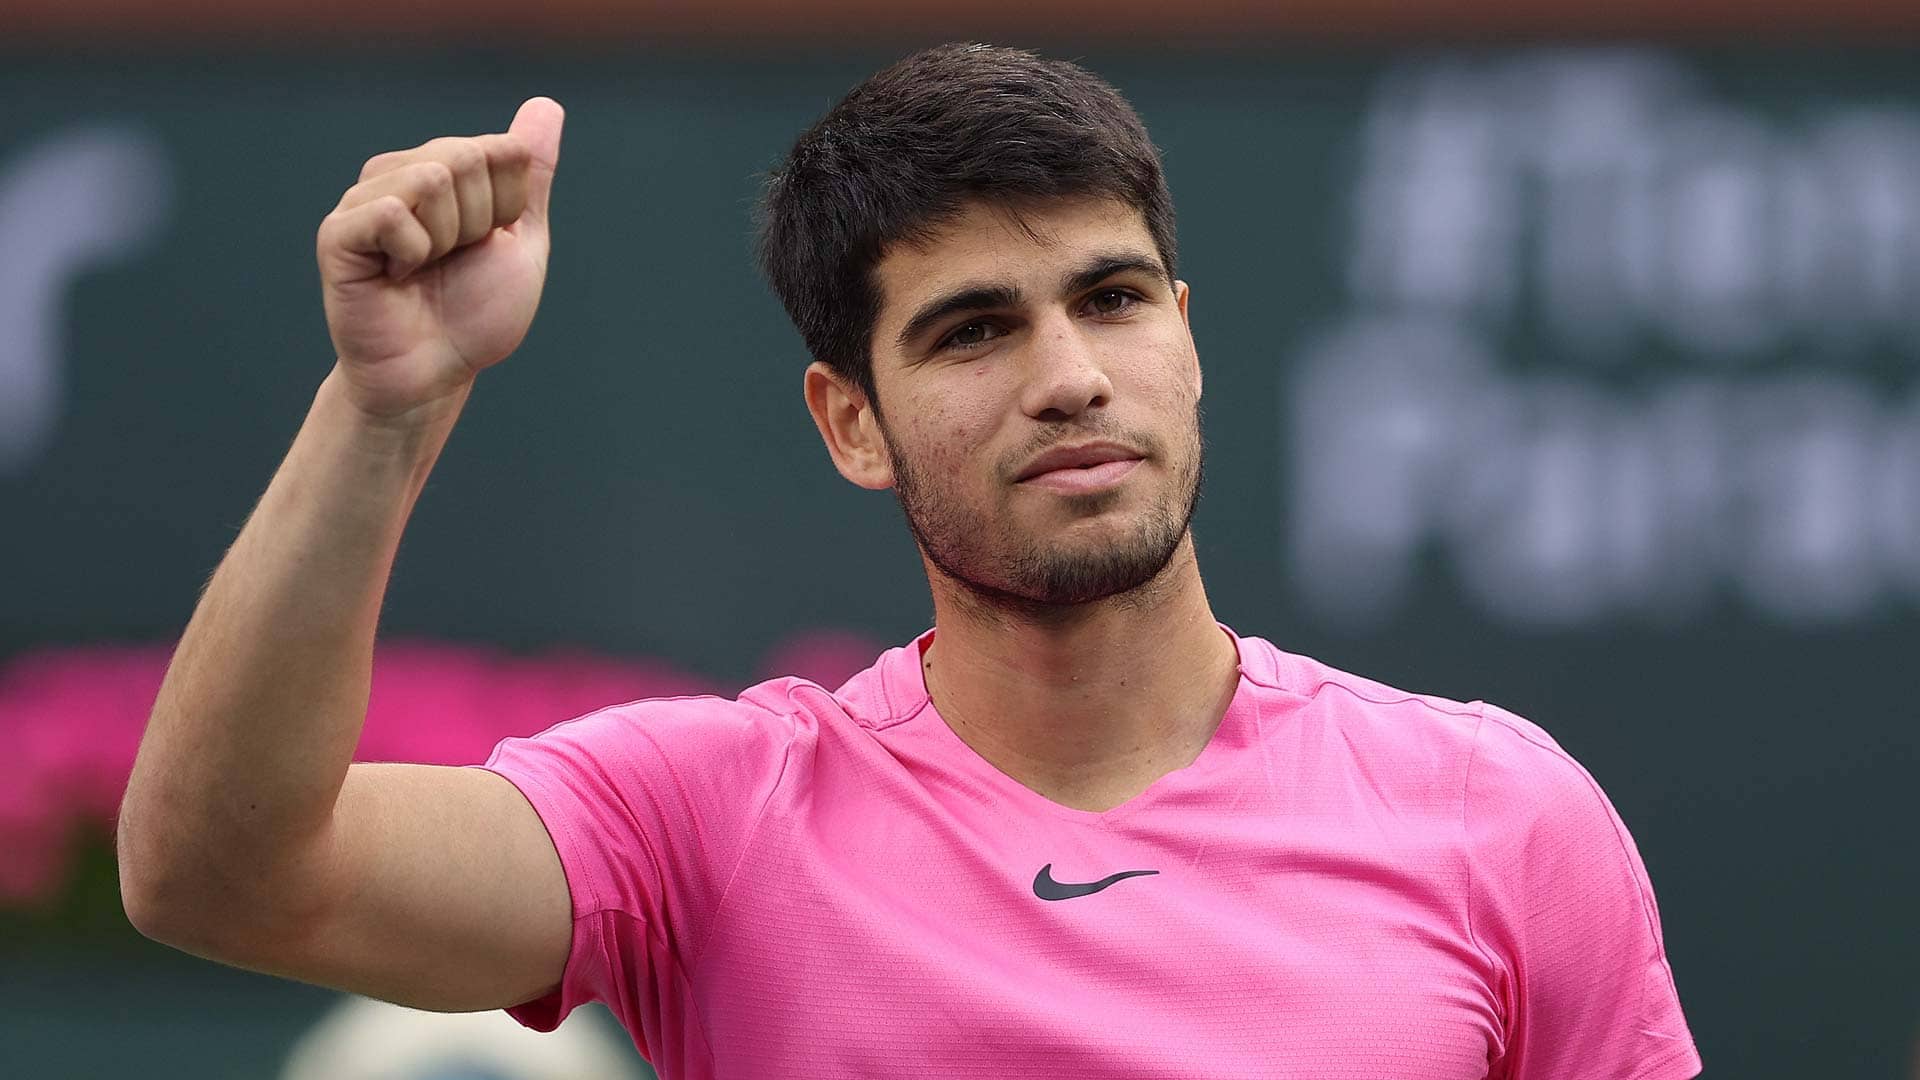 Carlos Alcaraz reclaimed the top spot in the Pepperstone ATP Rankings after winning Indian Wells.